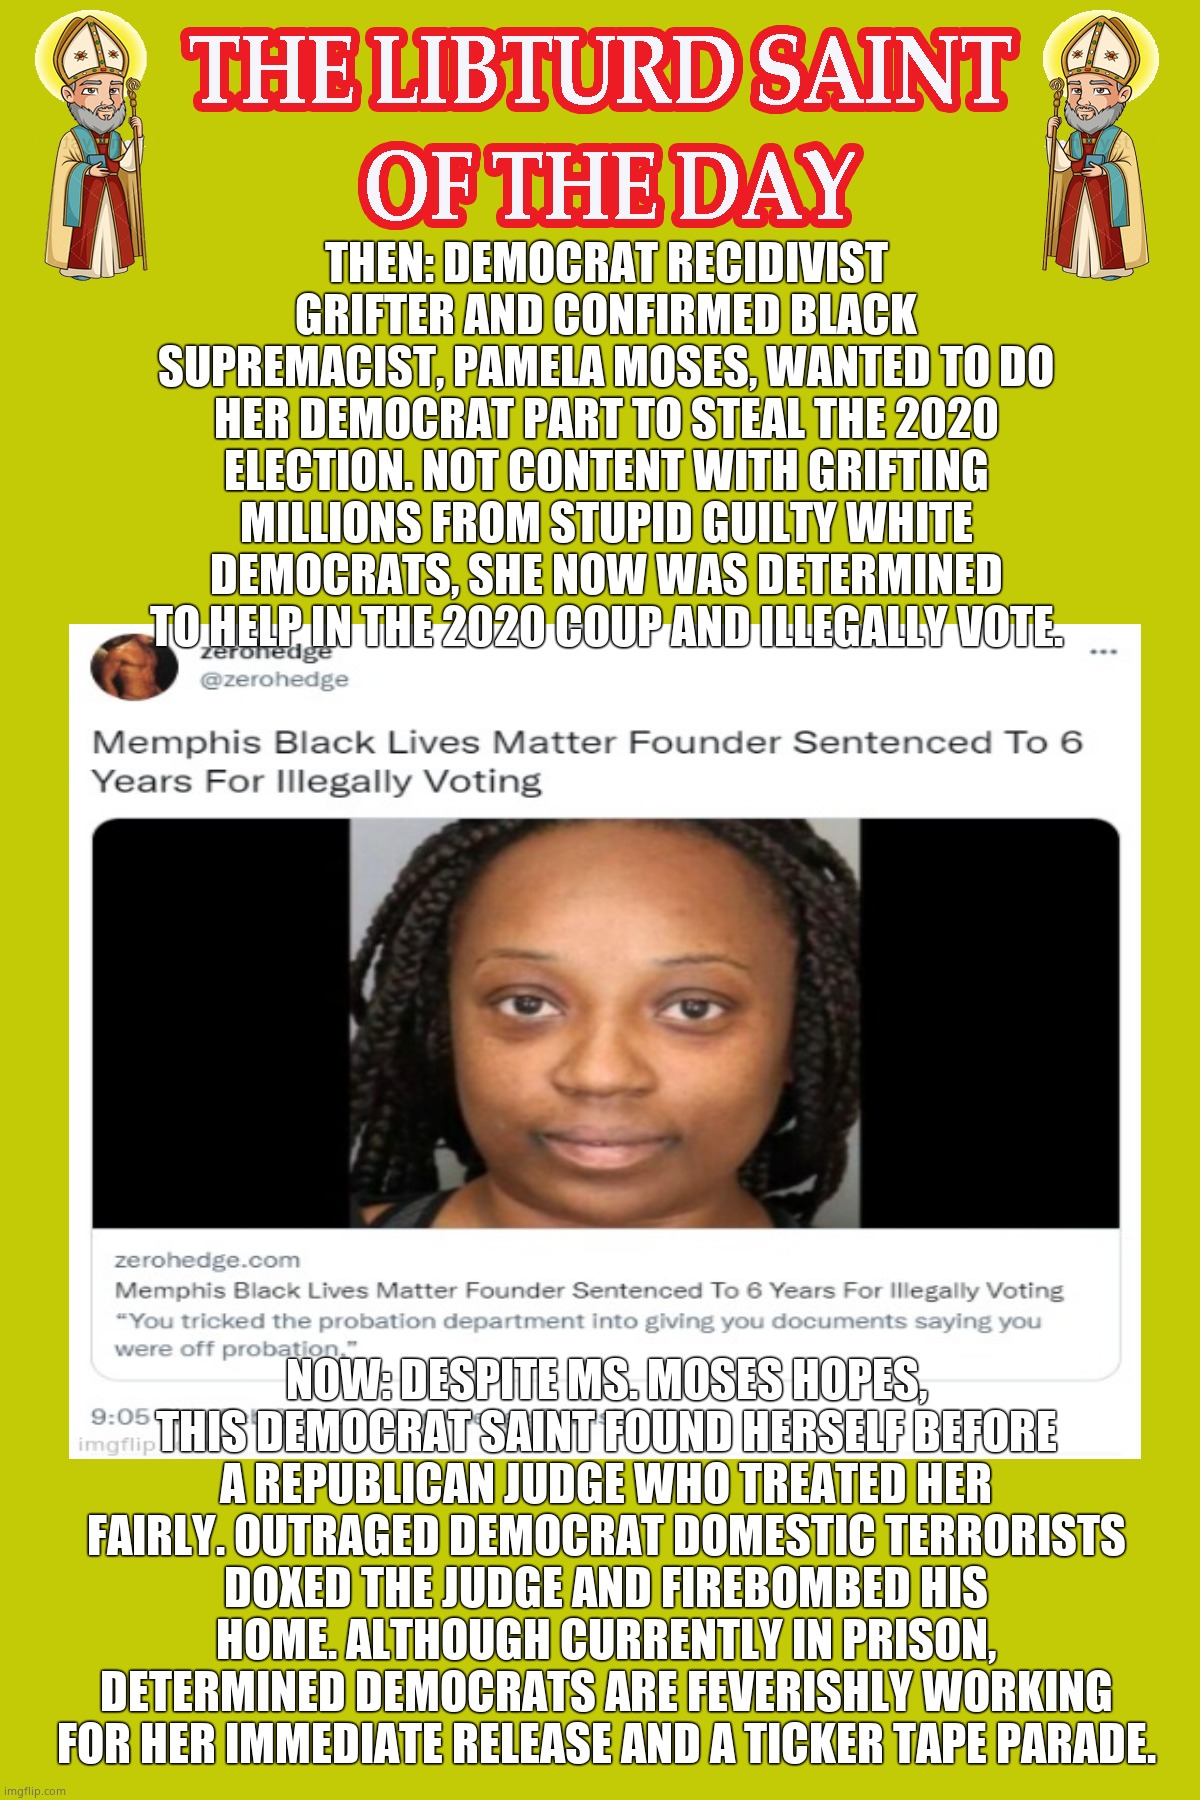 LIBTURD SAINT OF THE DAY - RECIDIVIST BLM BLACK SUPREMACIST CON ARTIST - PAMELA MOSES - BLM GRIFTING & ATTEMPTED COUP | THEN: DEMOCRAT RECIDIVIST GRIFTER AND CONFIRMED BLACK SUPREMACIST, PAMELA MOSES, WANTED TO DO HER DEMOCRAT PART TO STEAL THE 2020 ELECTION. NOT CONTENT WITH GRIFTING MILLIONS FROM STUPID GUILTY WHITE DEMOCRATS, SHE NOW WAS DETERMINED TO HELP IN THE 2020 COUP AND ILLEGALLY VOTE. NOW: DESPITE MS. MOSES HOPES, THIS DEMOCRAT SAINT FOUND HERSELF BEFORE A REPUBLICAN JUDGE WHO TREATED HER FAIRLY. OUTRAGED DEMOCRAT DOMESTIC TERRORISTS DOXED THE JUDGE AND FIREBOMBED HIS HOME. ALTHOUGH CURRENTLY IN PRISON, DETERMINED DEMOCRATS ARE FEVERISHLY WORKING FOR HER IMMEDIATE RELEASE AND A TICKER TAPE PARADE. | image tagged in lotd,libturd saint of the day,pamela moses | made w/ Imgflip meme maker